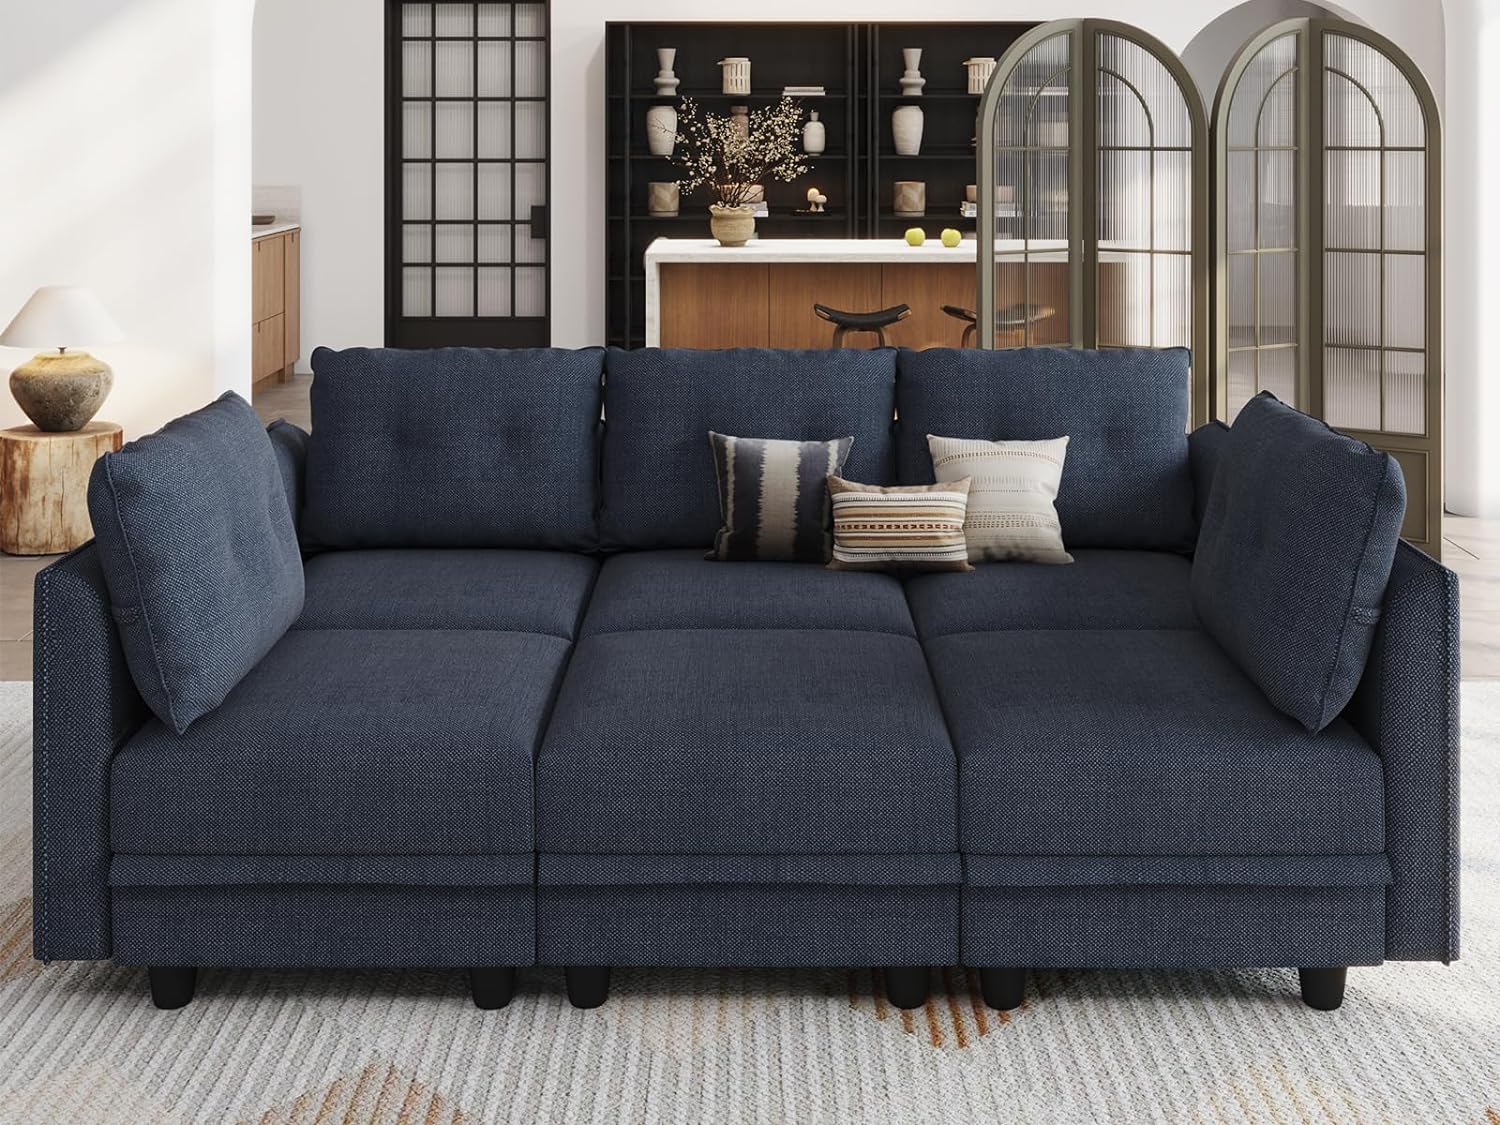 LLappuil Modular Sofa Sectional Sleeper Couch Bed Reversible Modular Couch with Storage Chaise, Denim Blue